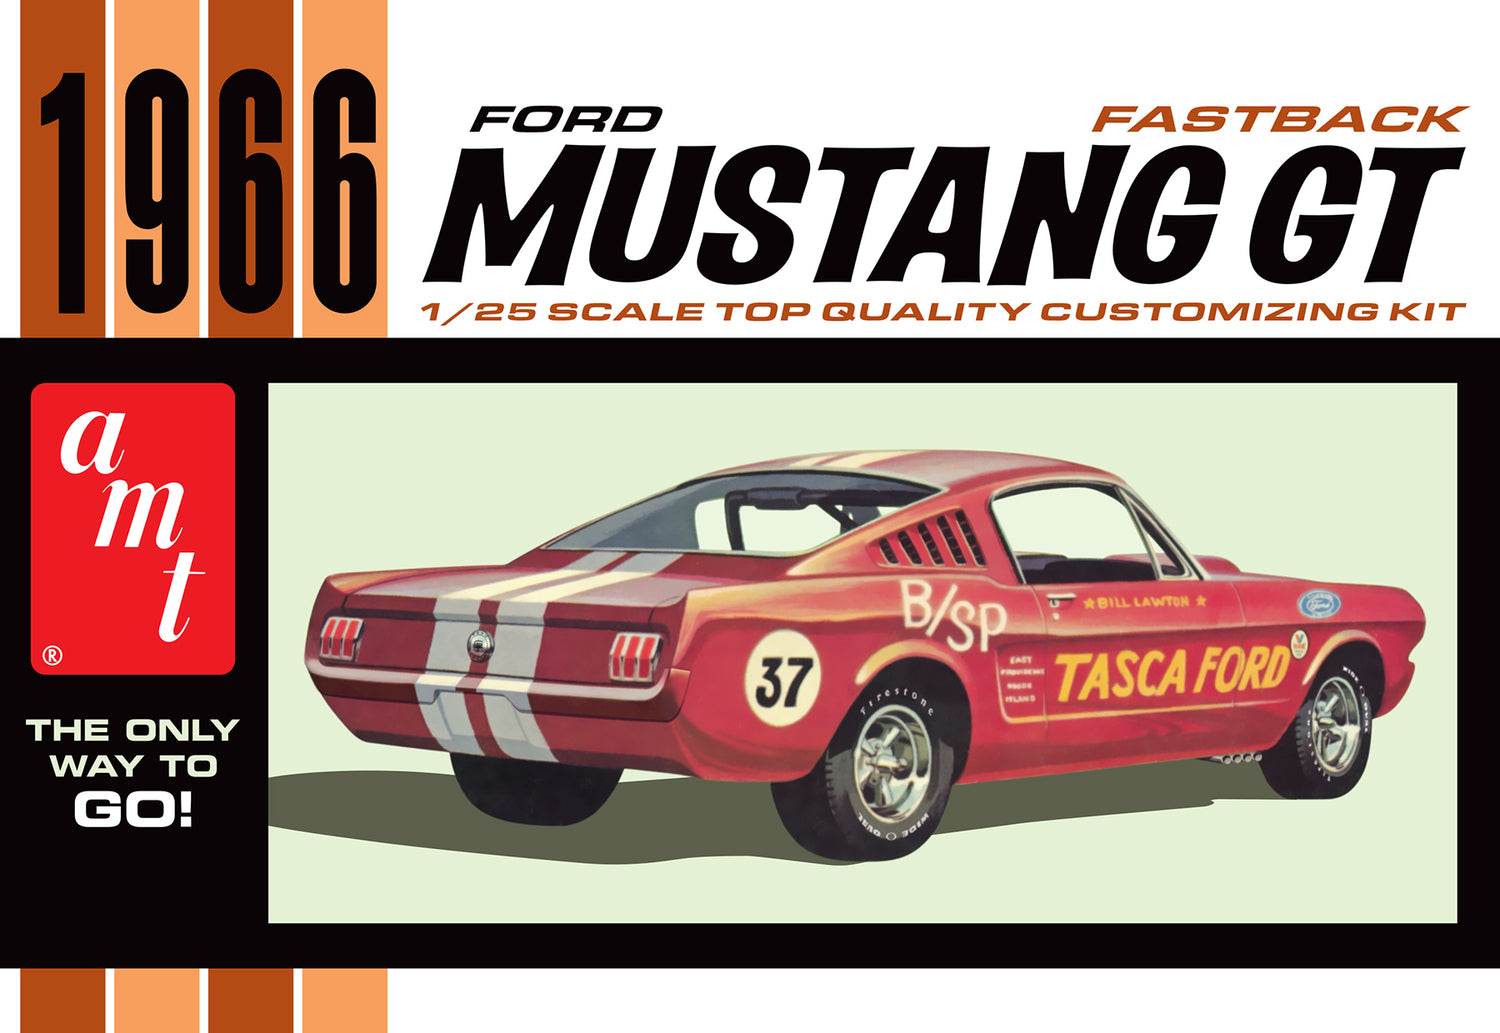 AMT 1966 Ford Mustang Fastback 2+2 1:25 Scale Model Kit